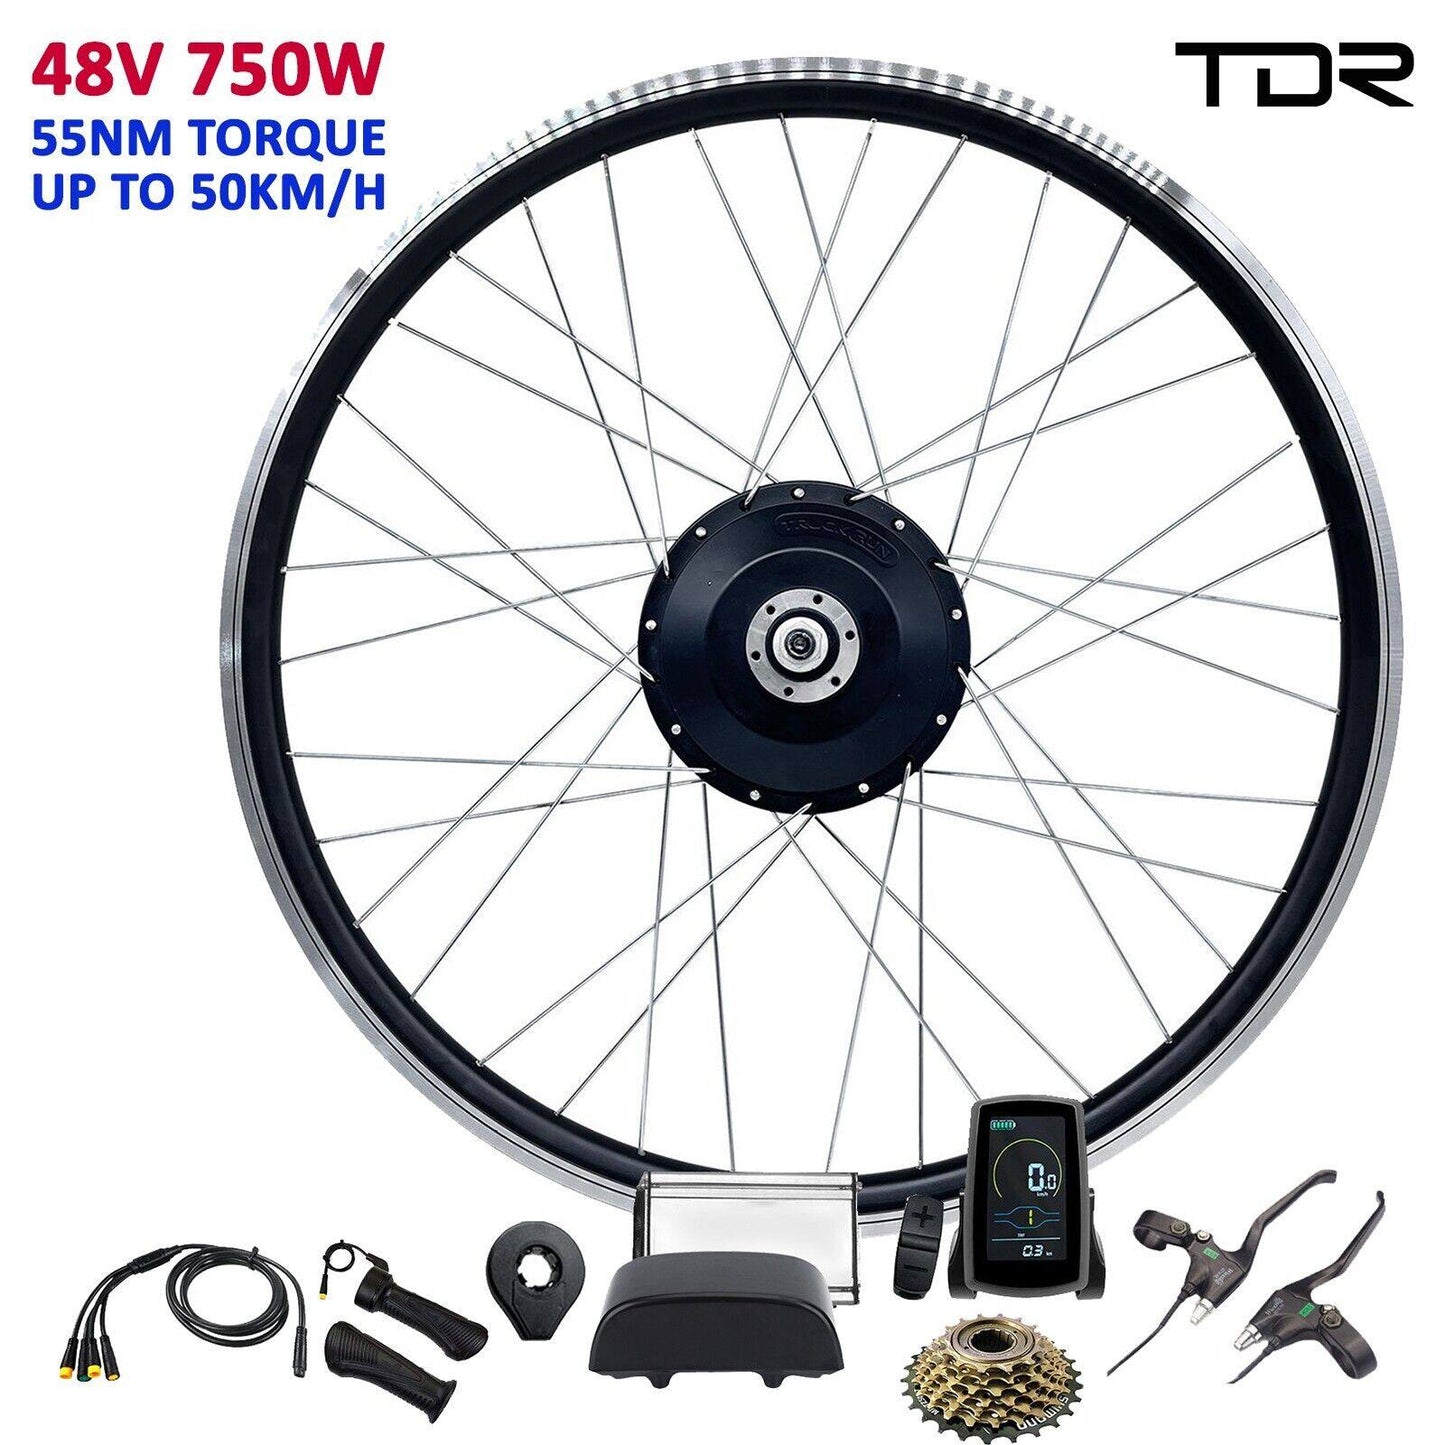 750W 26" Rear Hub 48V Electric Bike Conversion Kit (Battery & Charger Not Included) - TDRMOTO